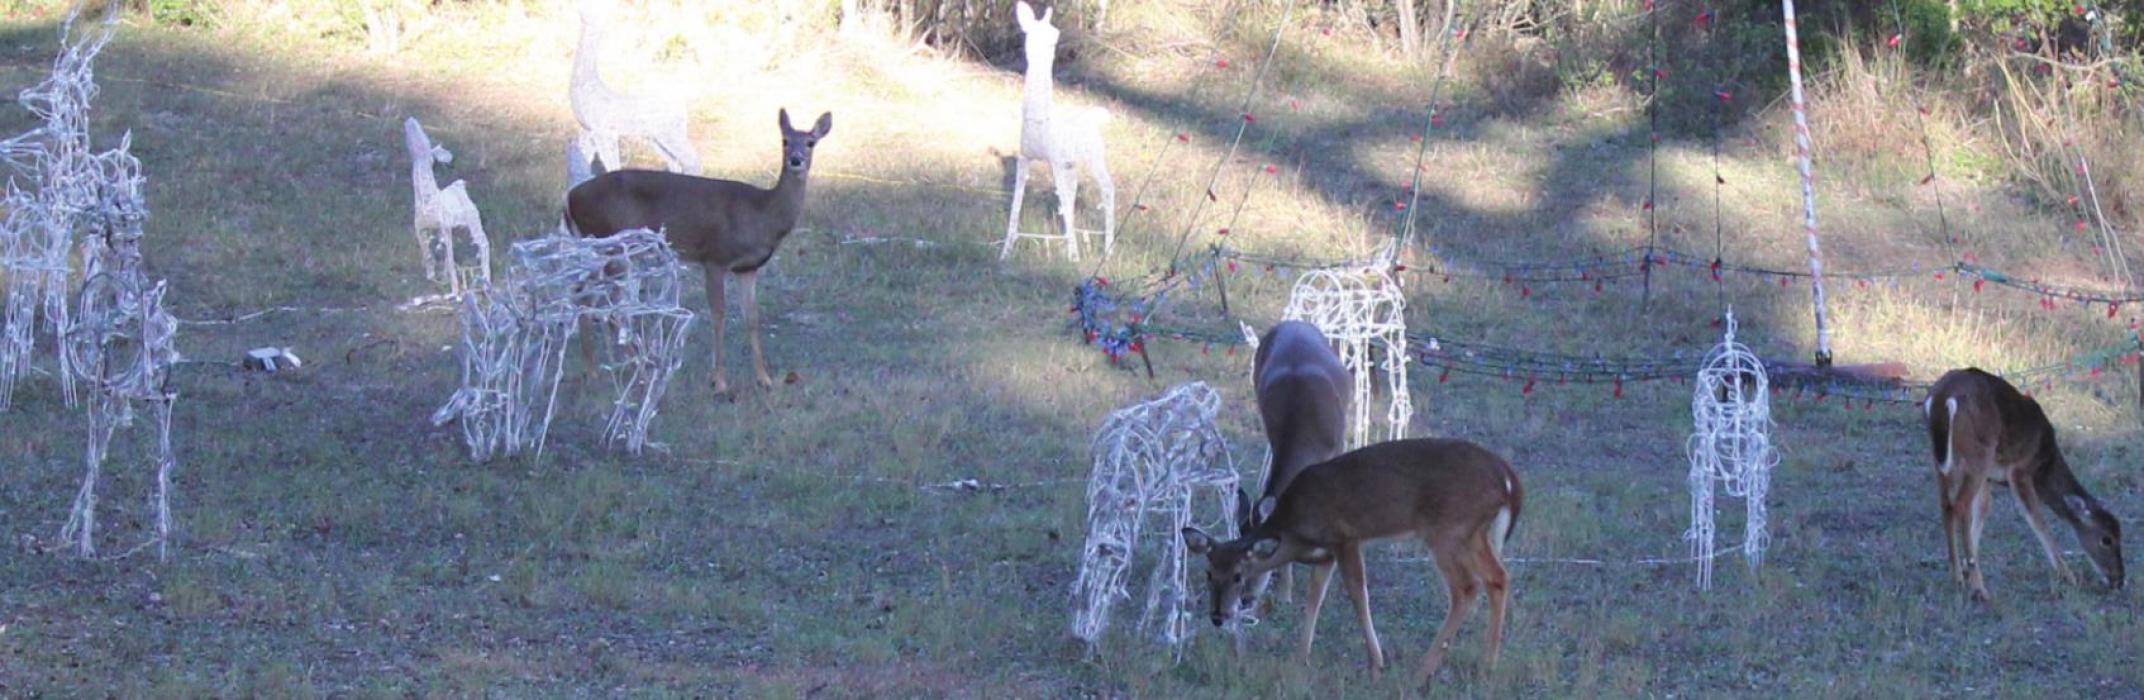 Four real deer mingled with the lighted reindeer frames at the park Tuesday afternoon. Photos by Jeff Wick